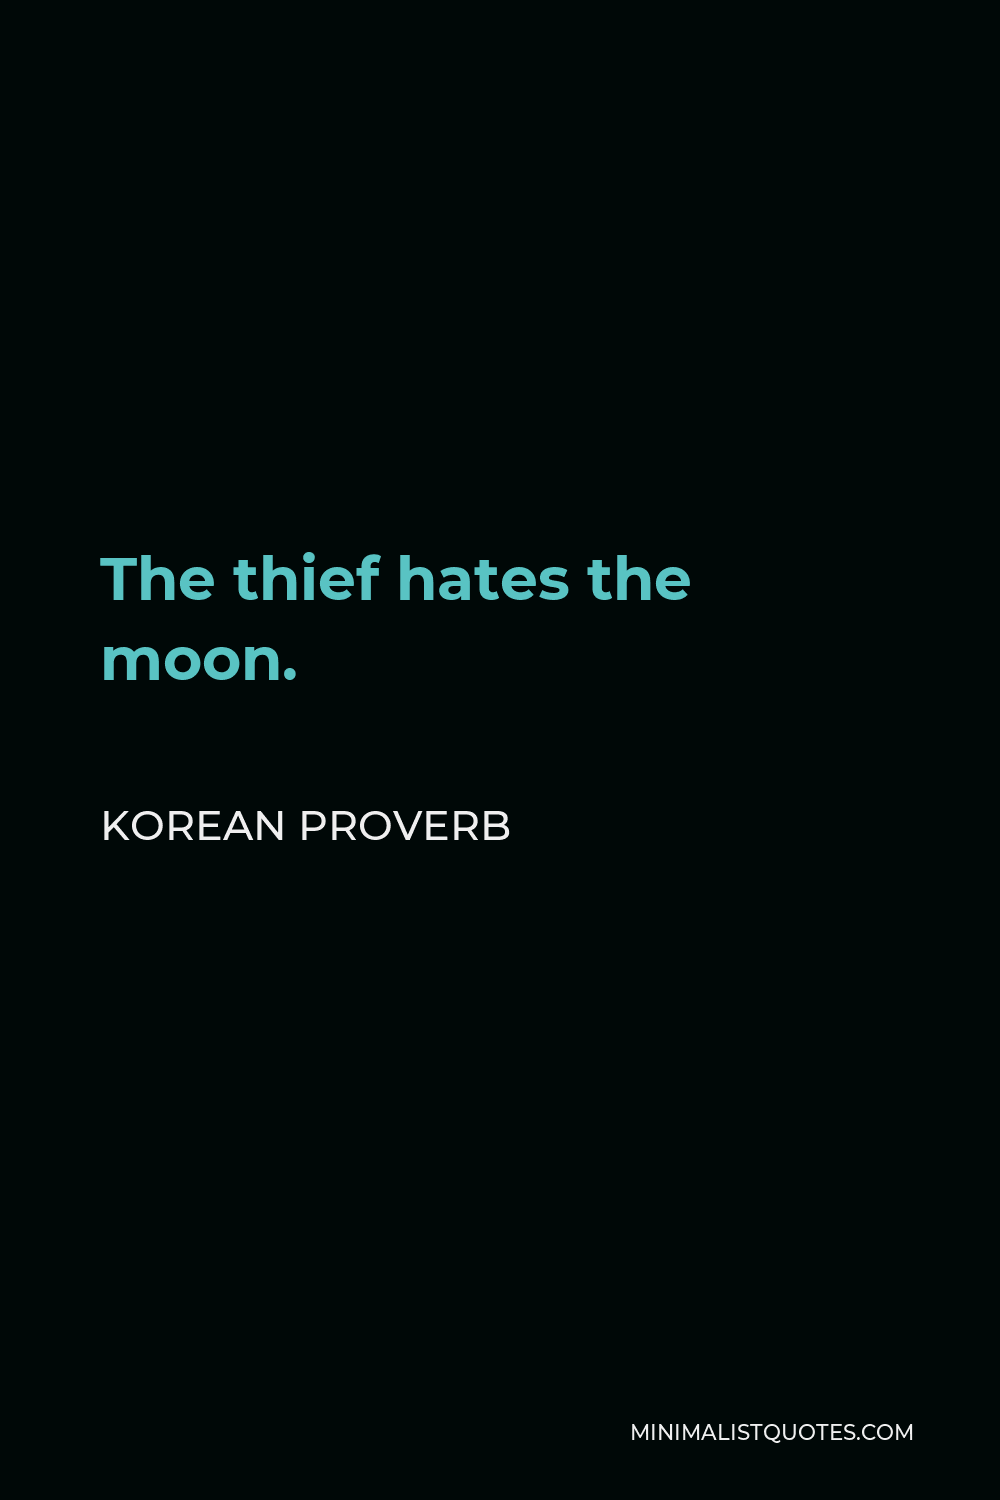 Korean Proverb Quote - The thief hates the moon.